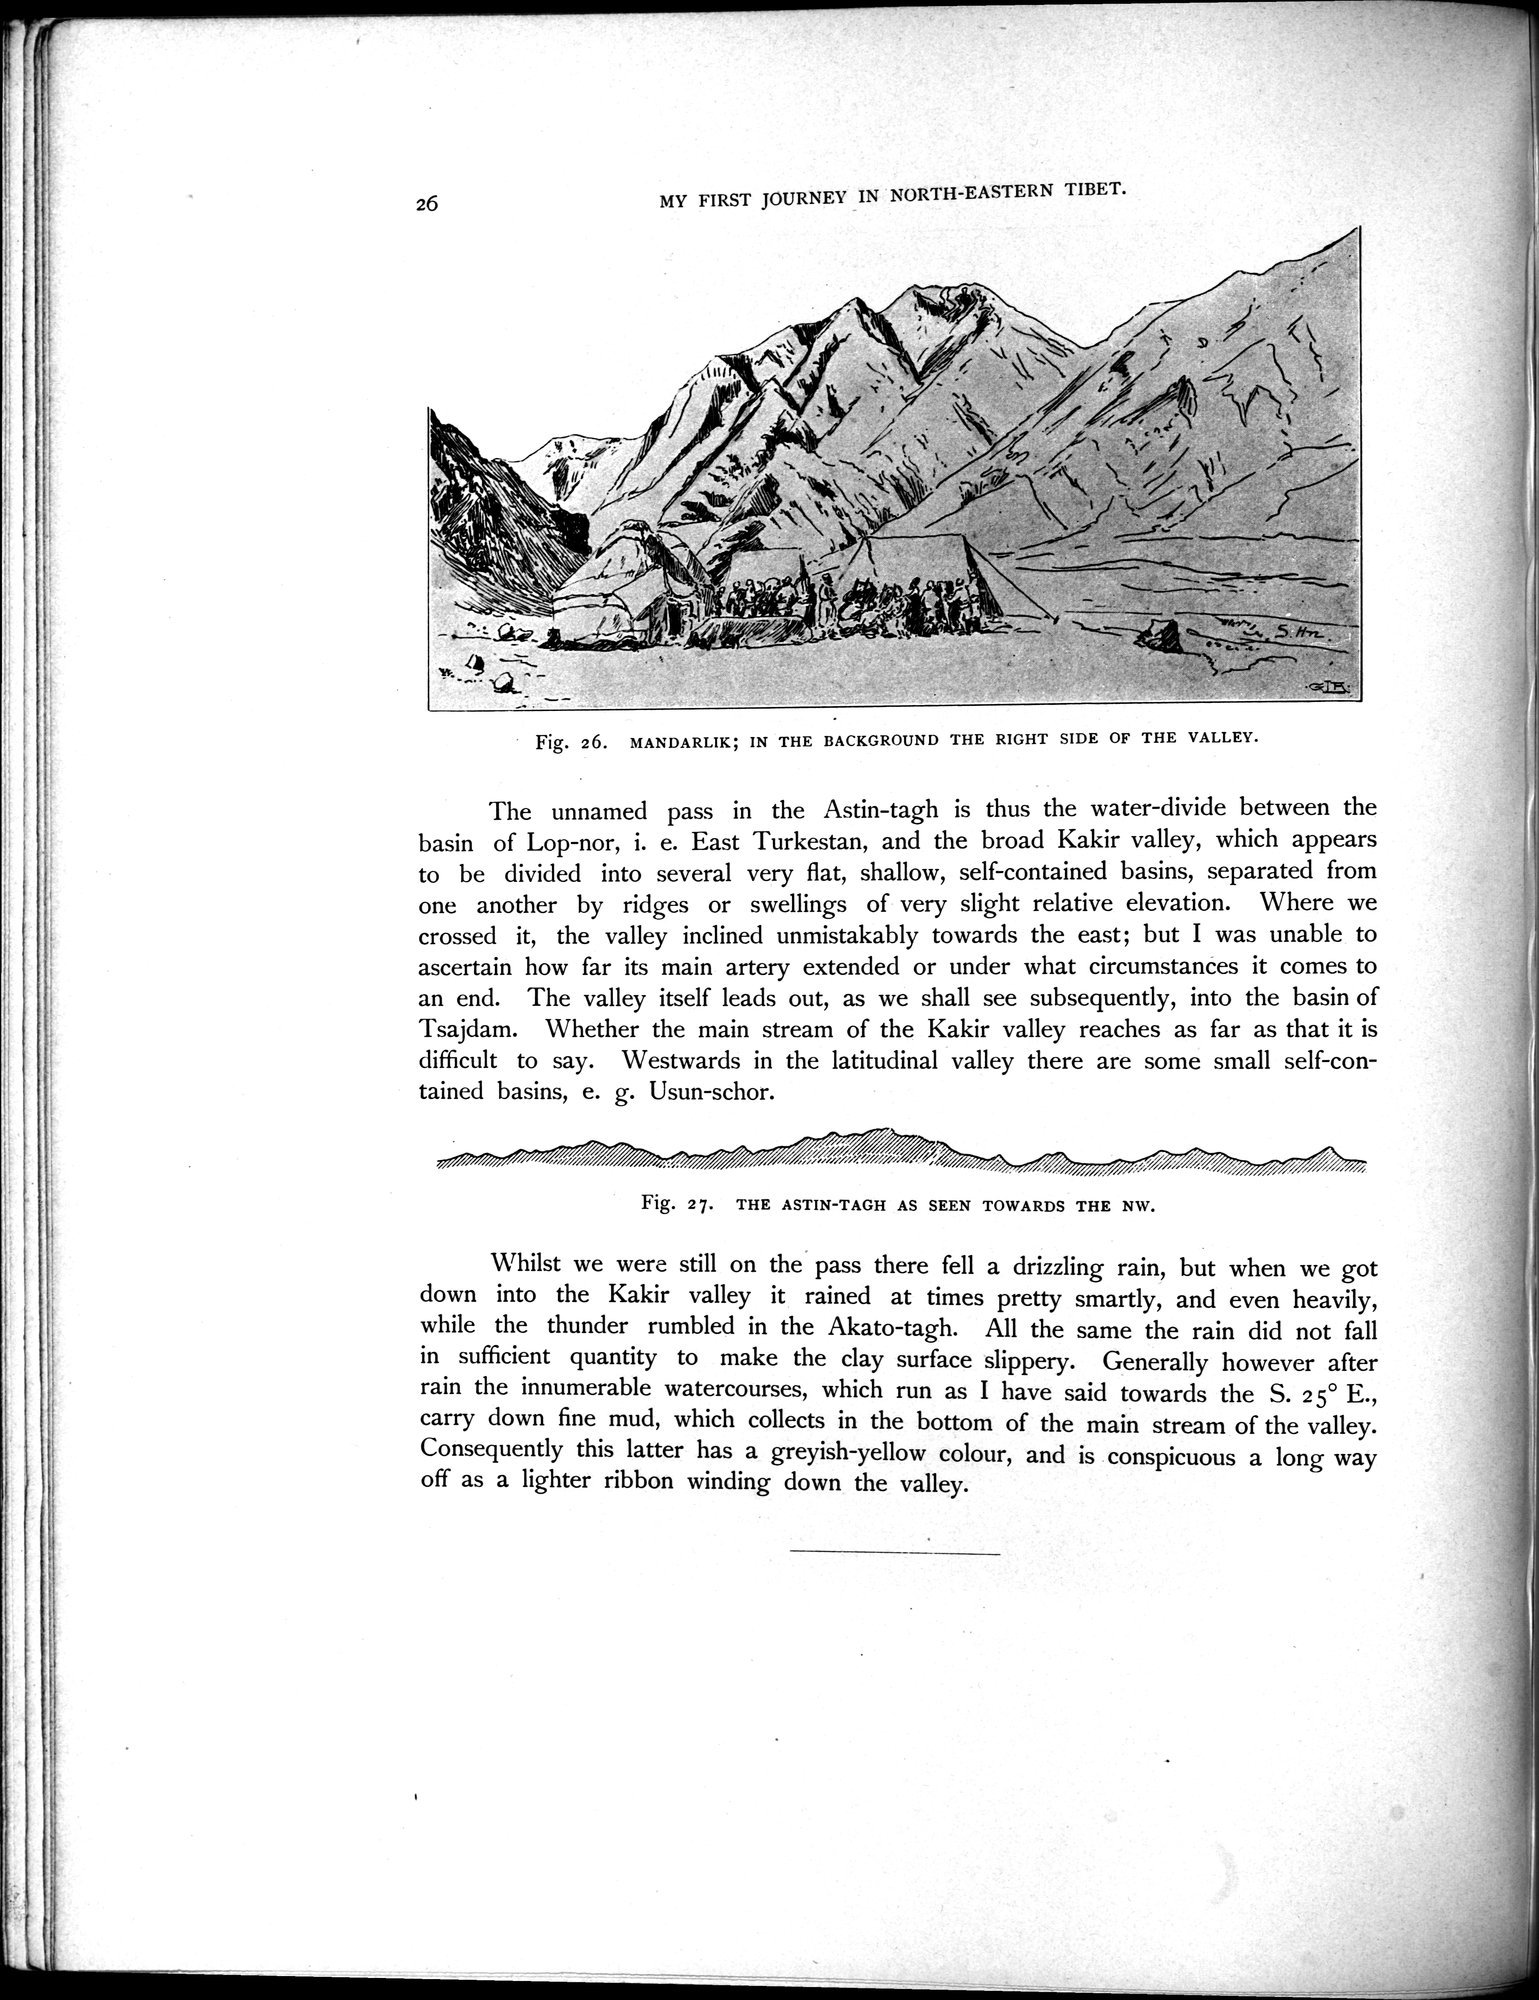 Scientific Results of a Journey in Central Asia, 1899-1902 : vol.3 / 38 ページ（白黒高解像度画像）